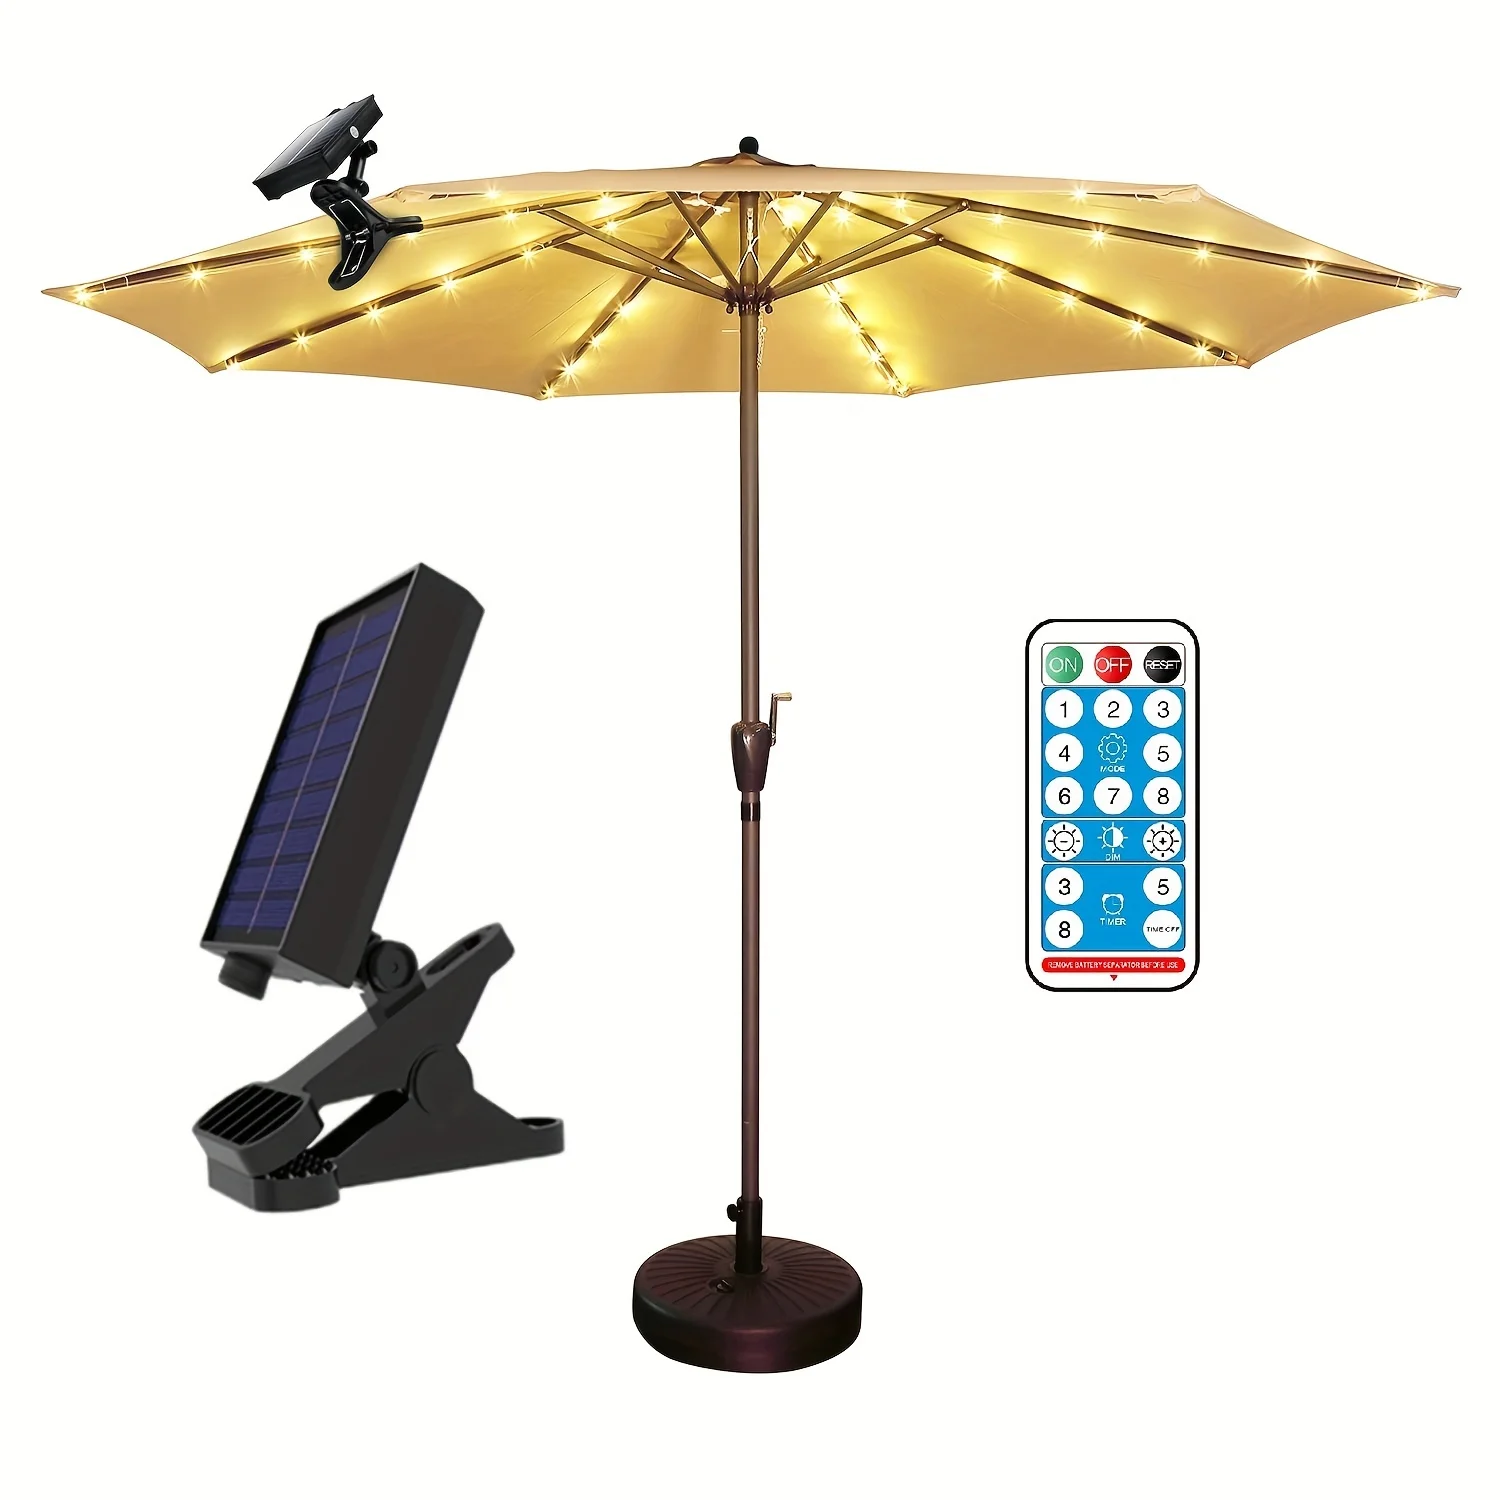 

Solar Patio Umbrella Lights 8 Modes String Lights with Clip Waterproof Light for Outdoor Lighting Deck Garden Party Decoration